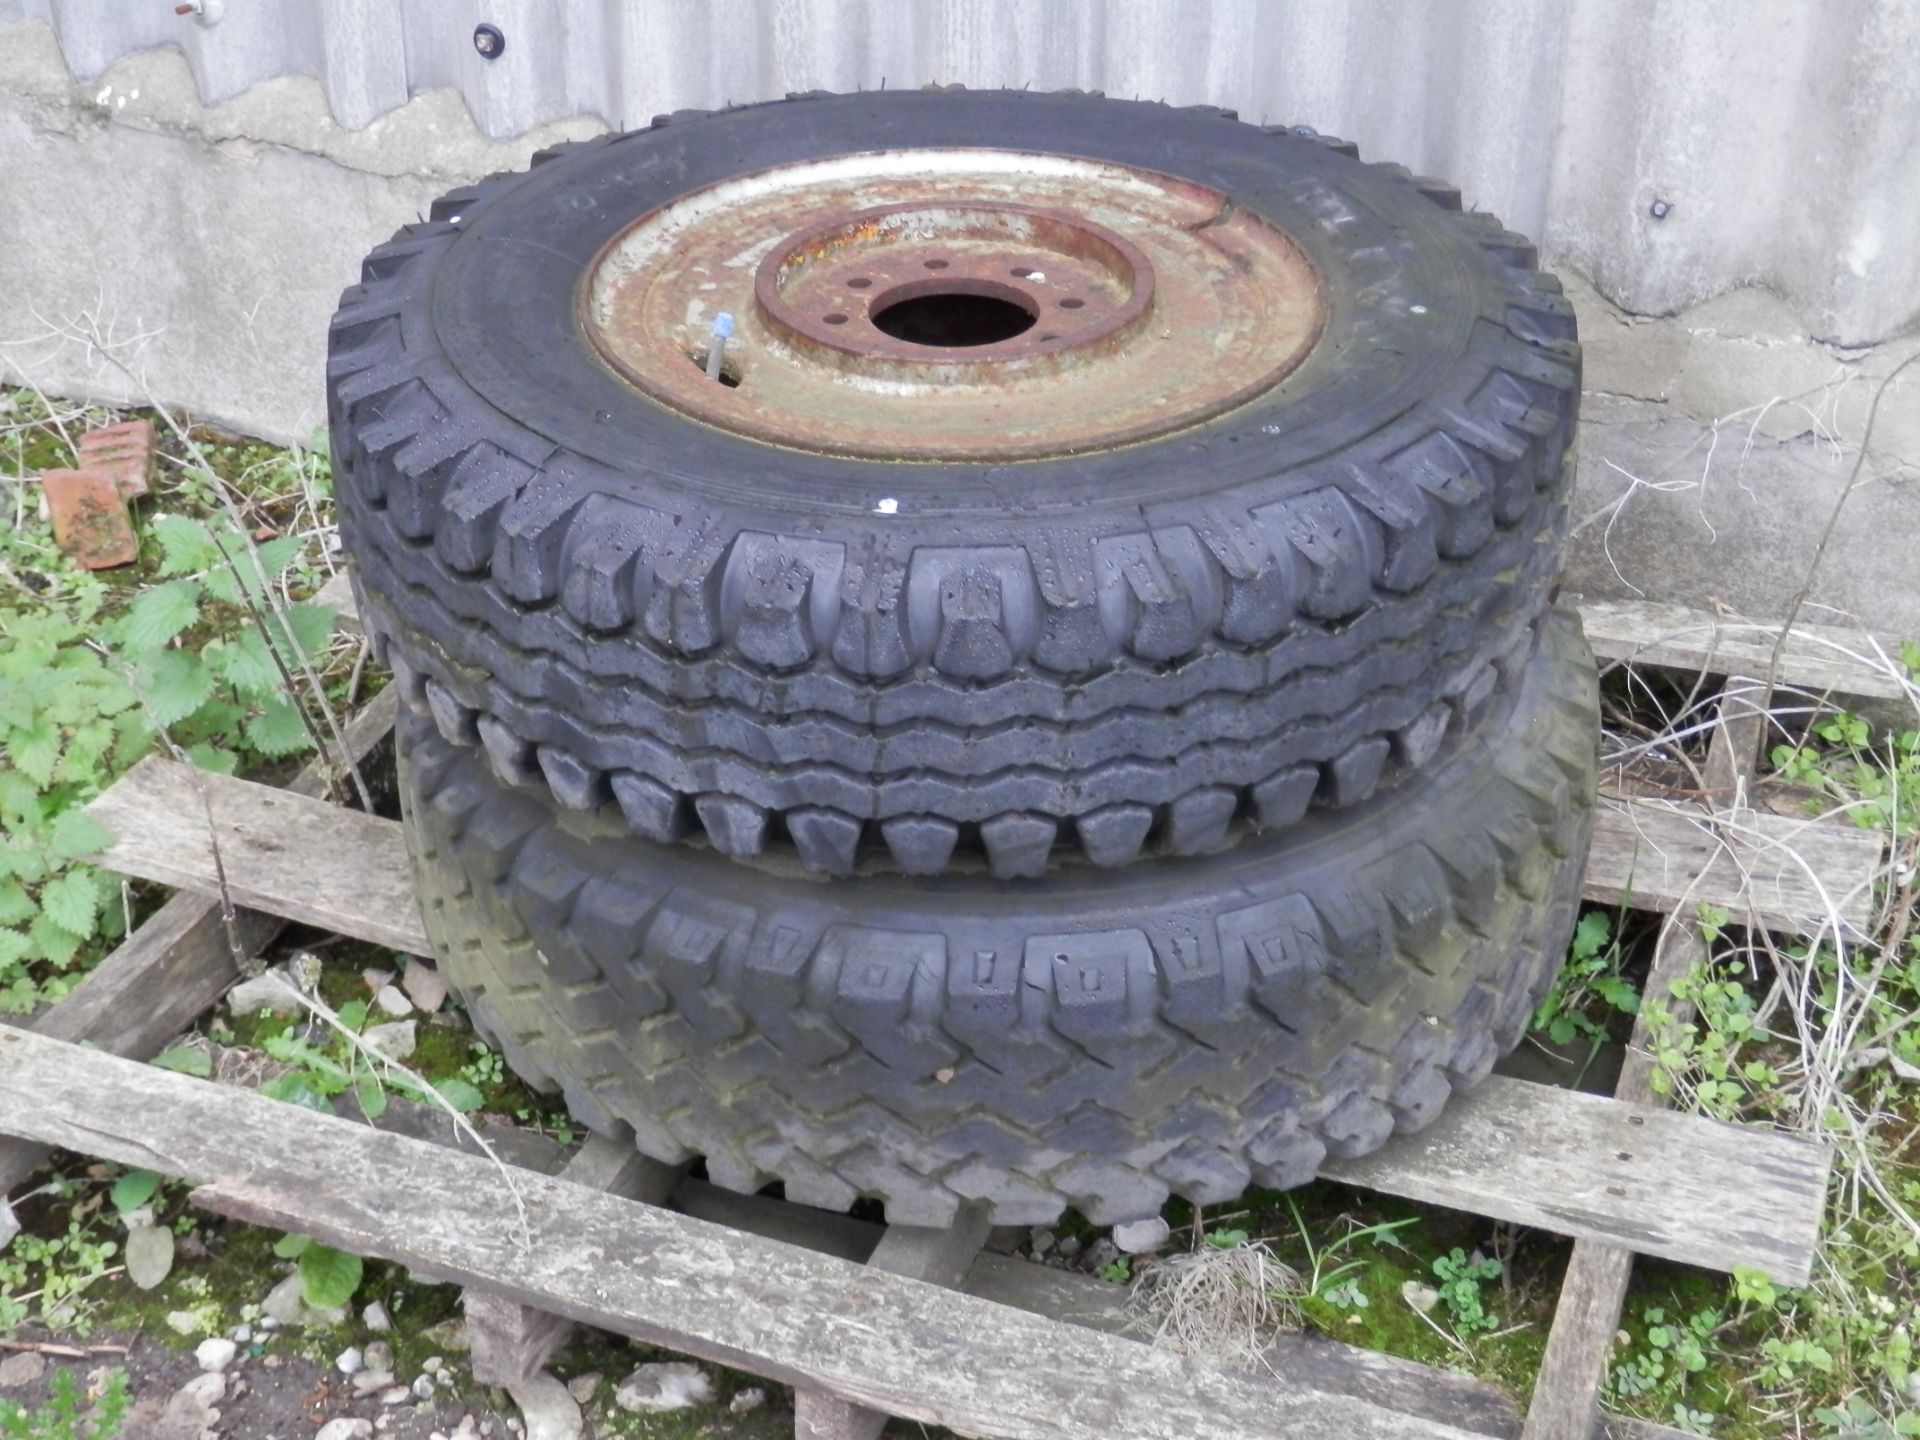 85 + ASSORTED LORRY, CAR & TRAILER TYRES & WHEELS, AS PICTURED. BUYER TO COLLECT COMPLETE JOBLOT. - Image 7 of 10